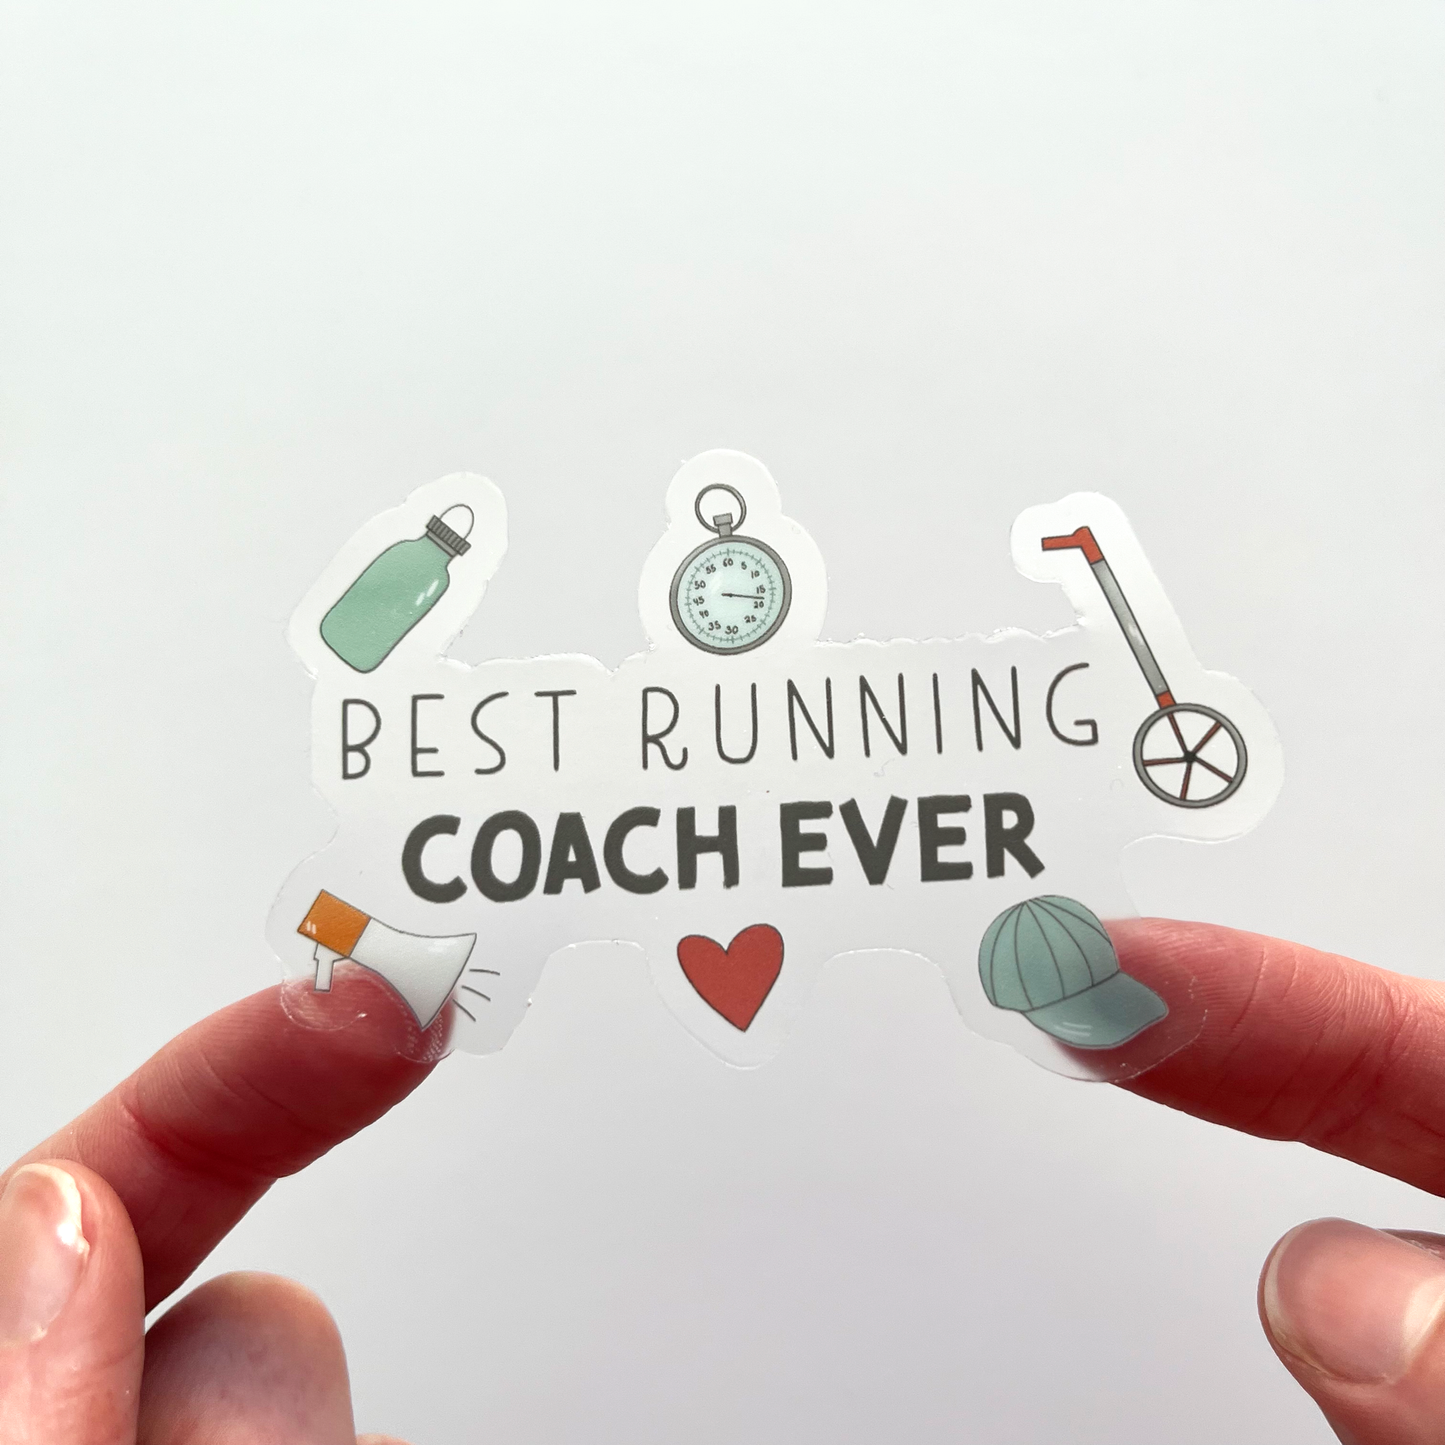 Clear best running coach ever sticker with various objects surrounding the text like water bottle, baseball hate, measuring sticker, megaphone, stop watch and a heart